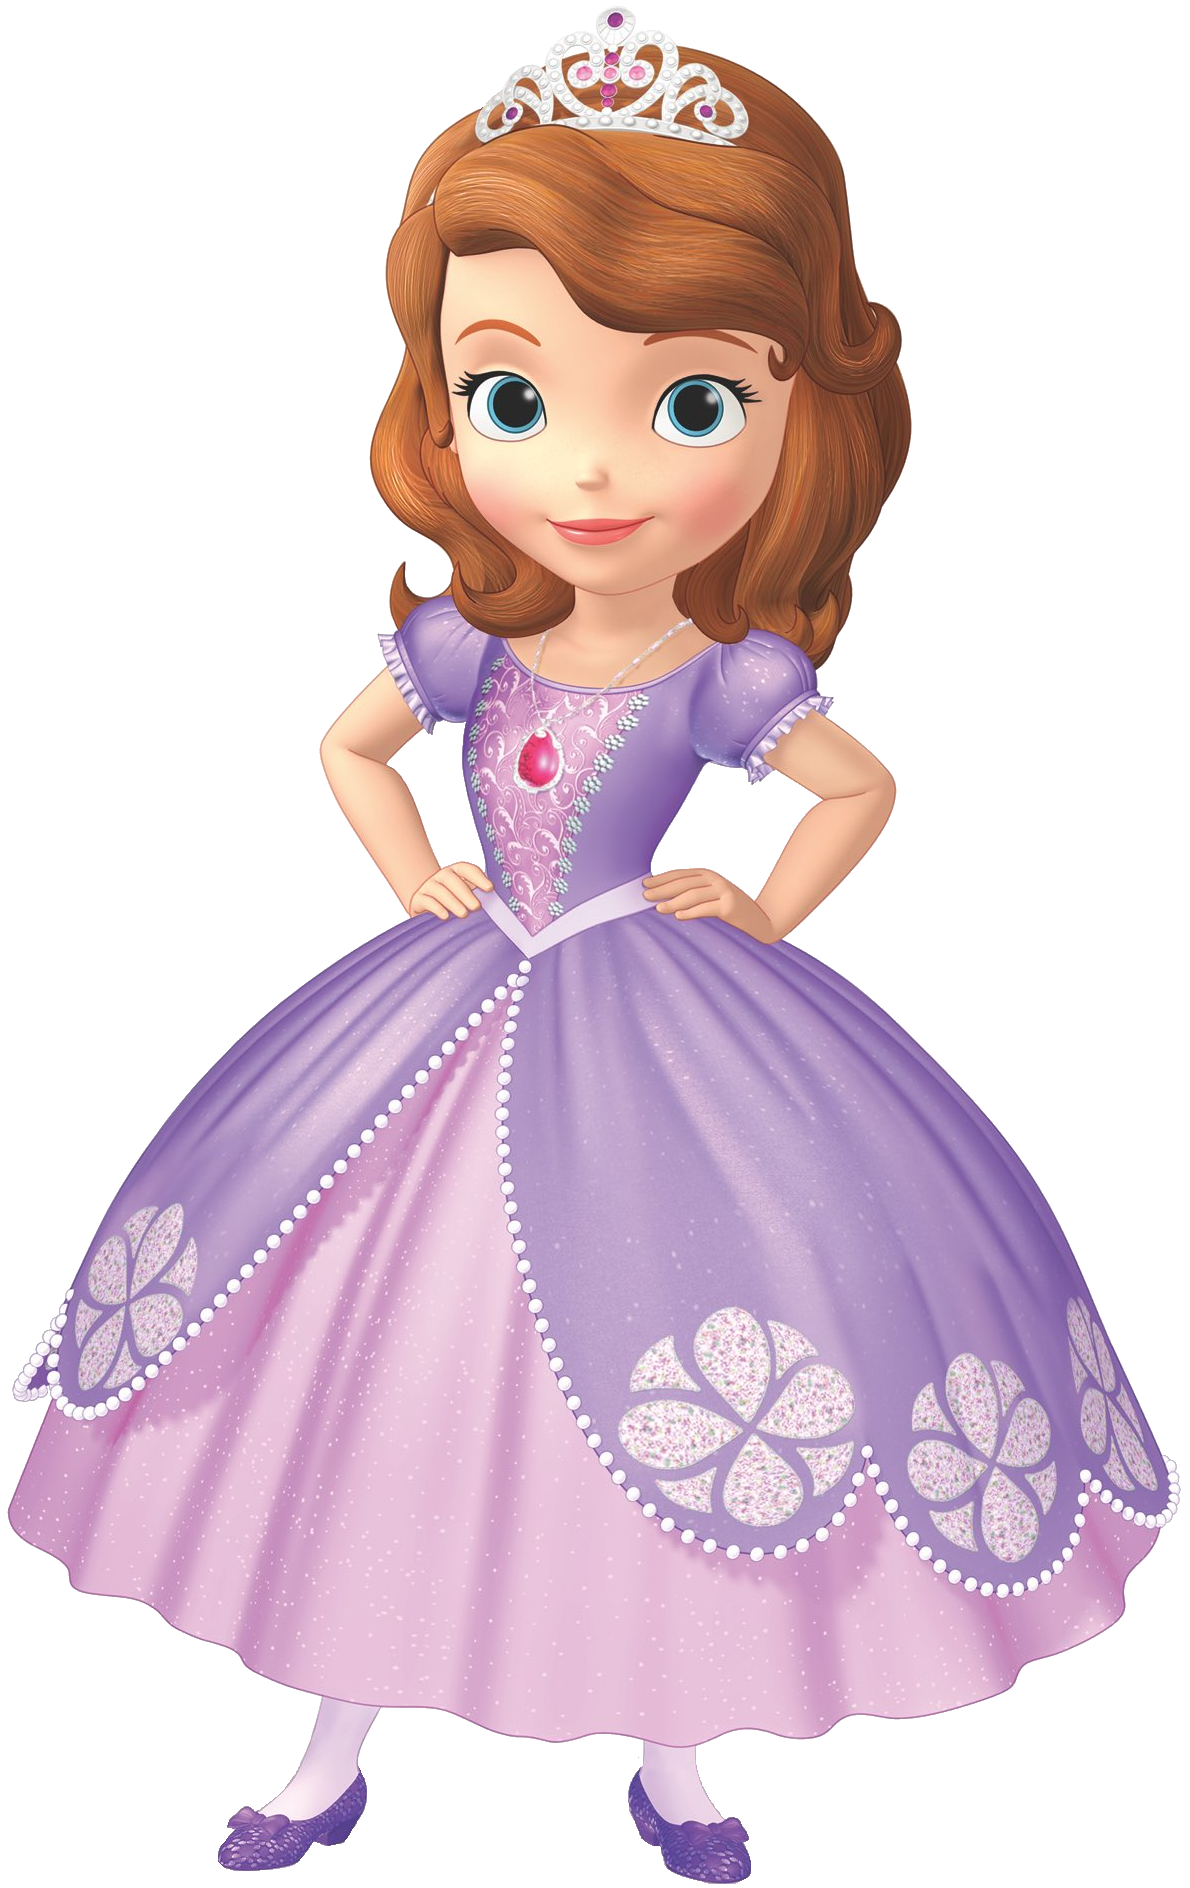 Image Sofias New Lookpng Sofia The First Wiki Fandom Powered By